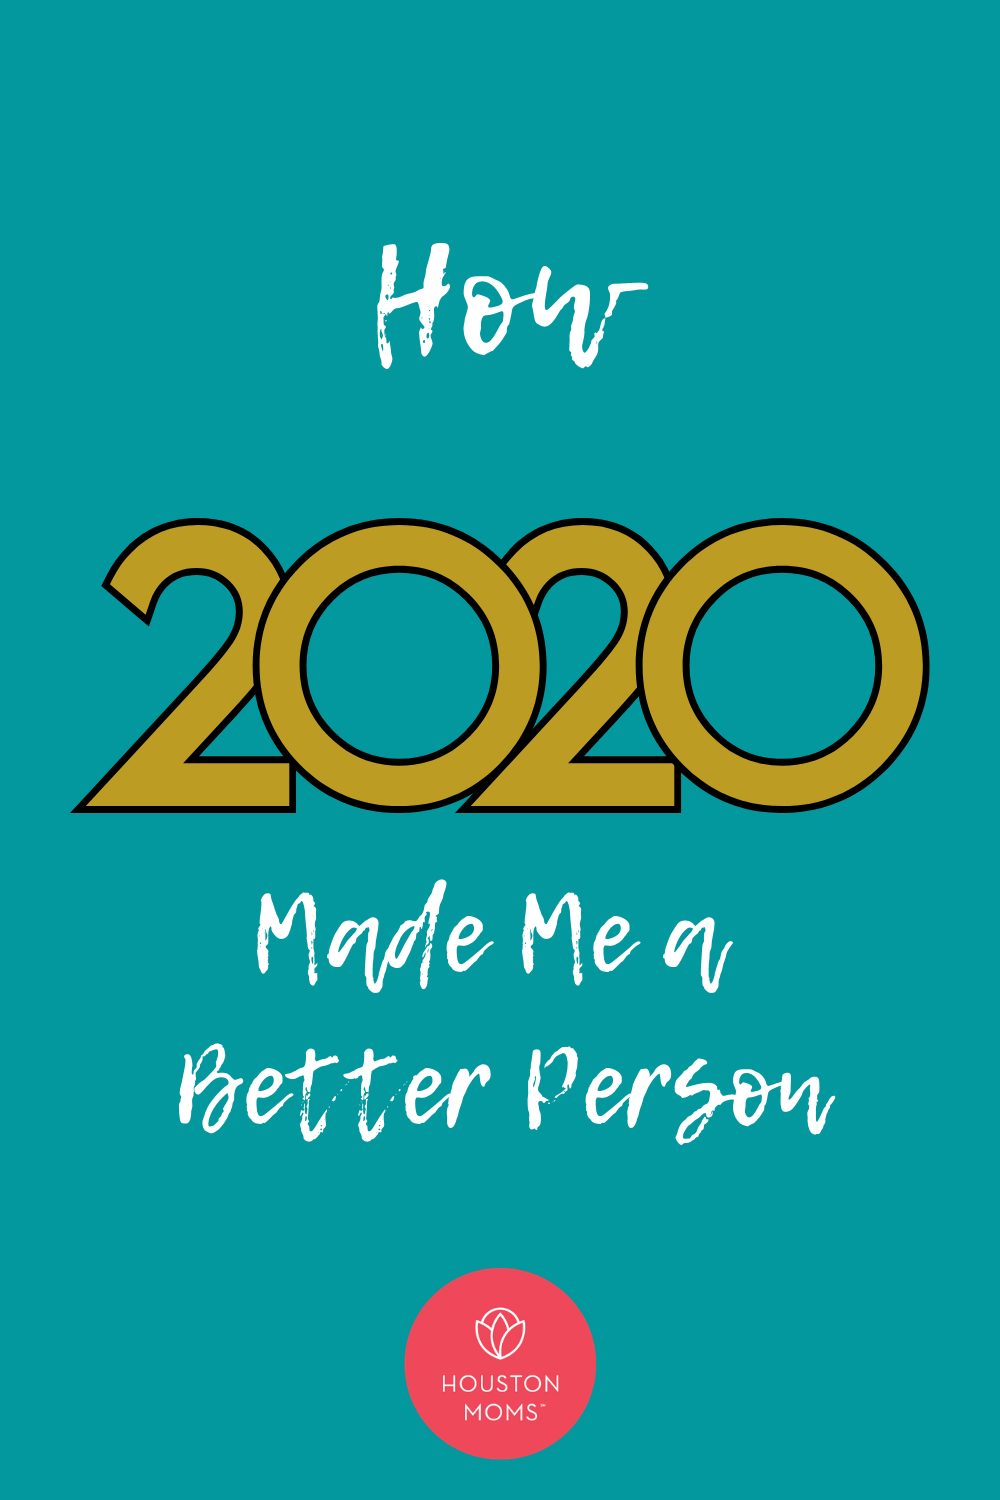 Houston Moms "How 2020 Made Me a Better Person" #houstonmoms #houstonmomsblog #momsaroundhouston